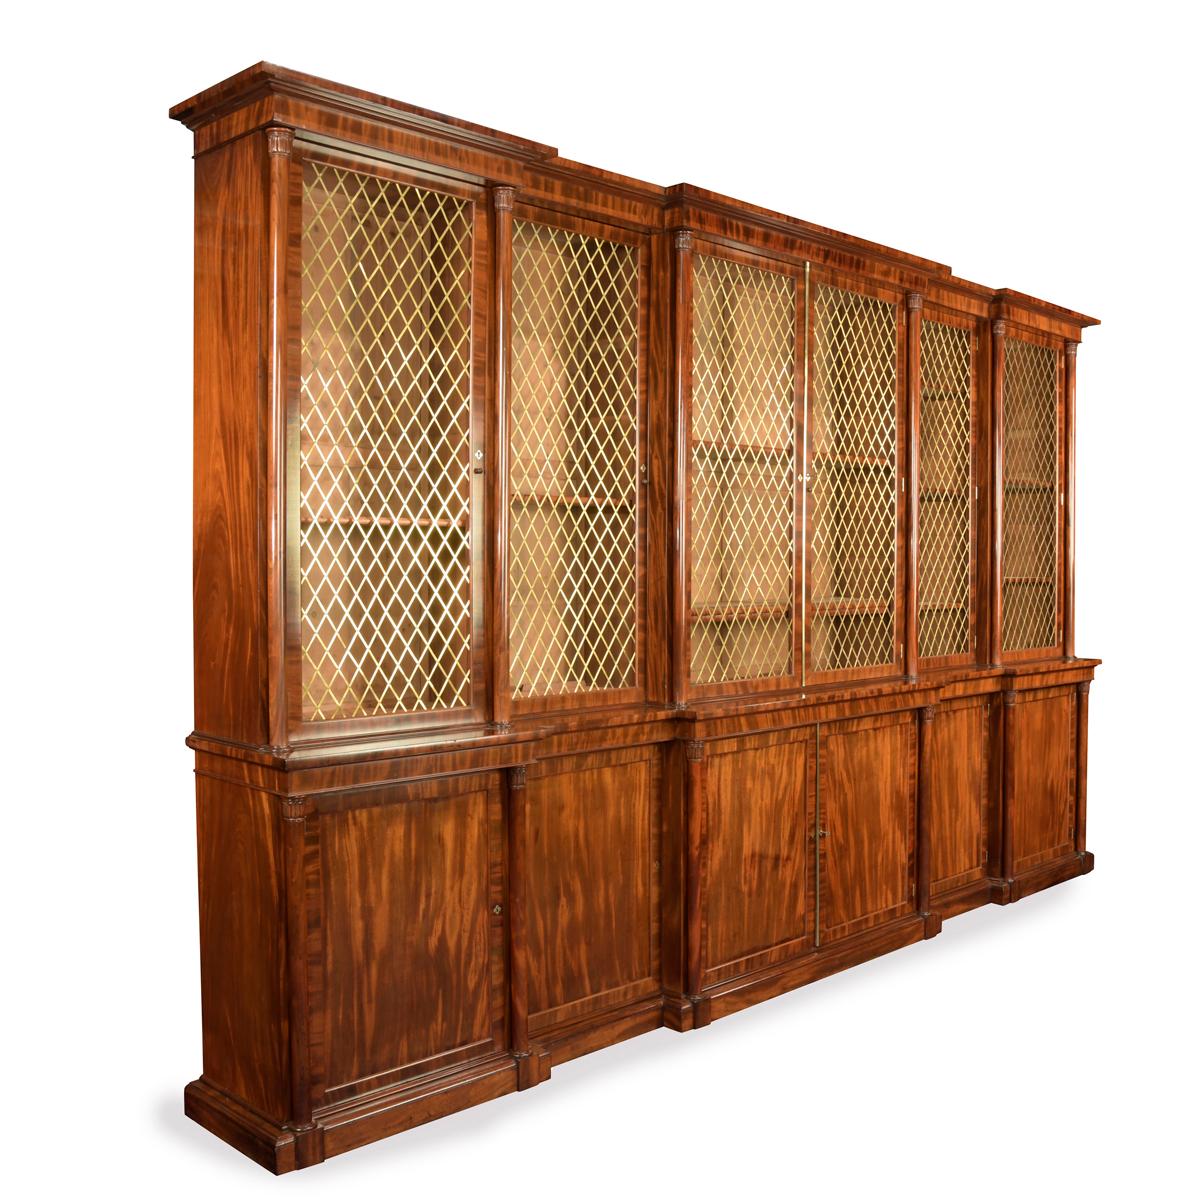 A large and impressive late Regency six door mahogany bookcase attributed to Gillows, the upper section with a triple breakfront cornice above glazed doors with brass diamond trellis grilles, each enclosing adjustable shelves, the base with panelled